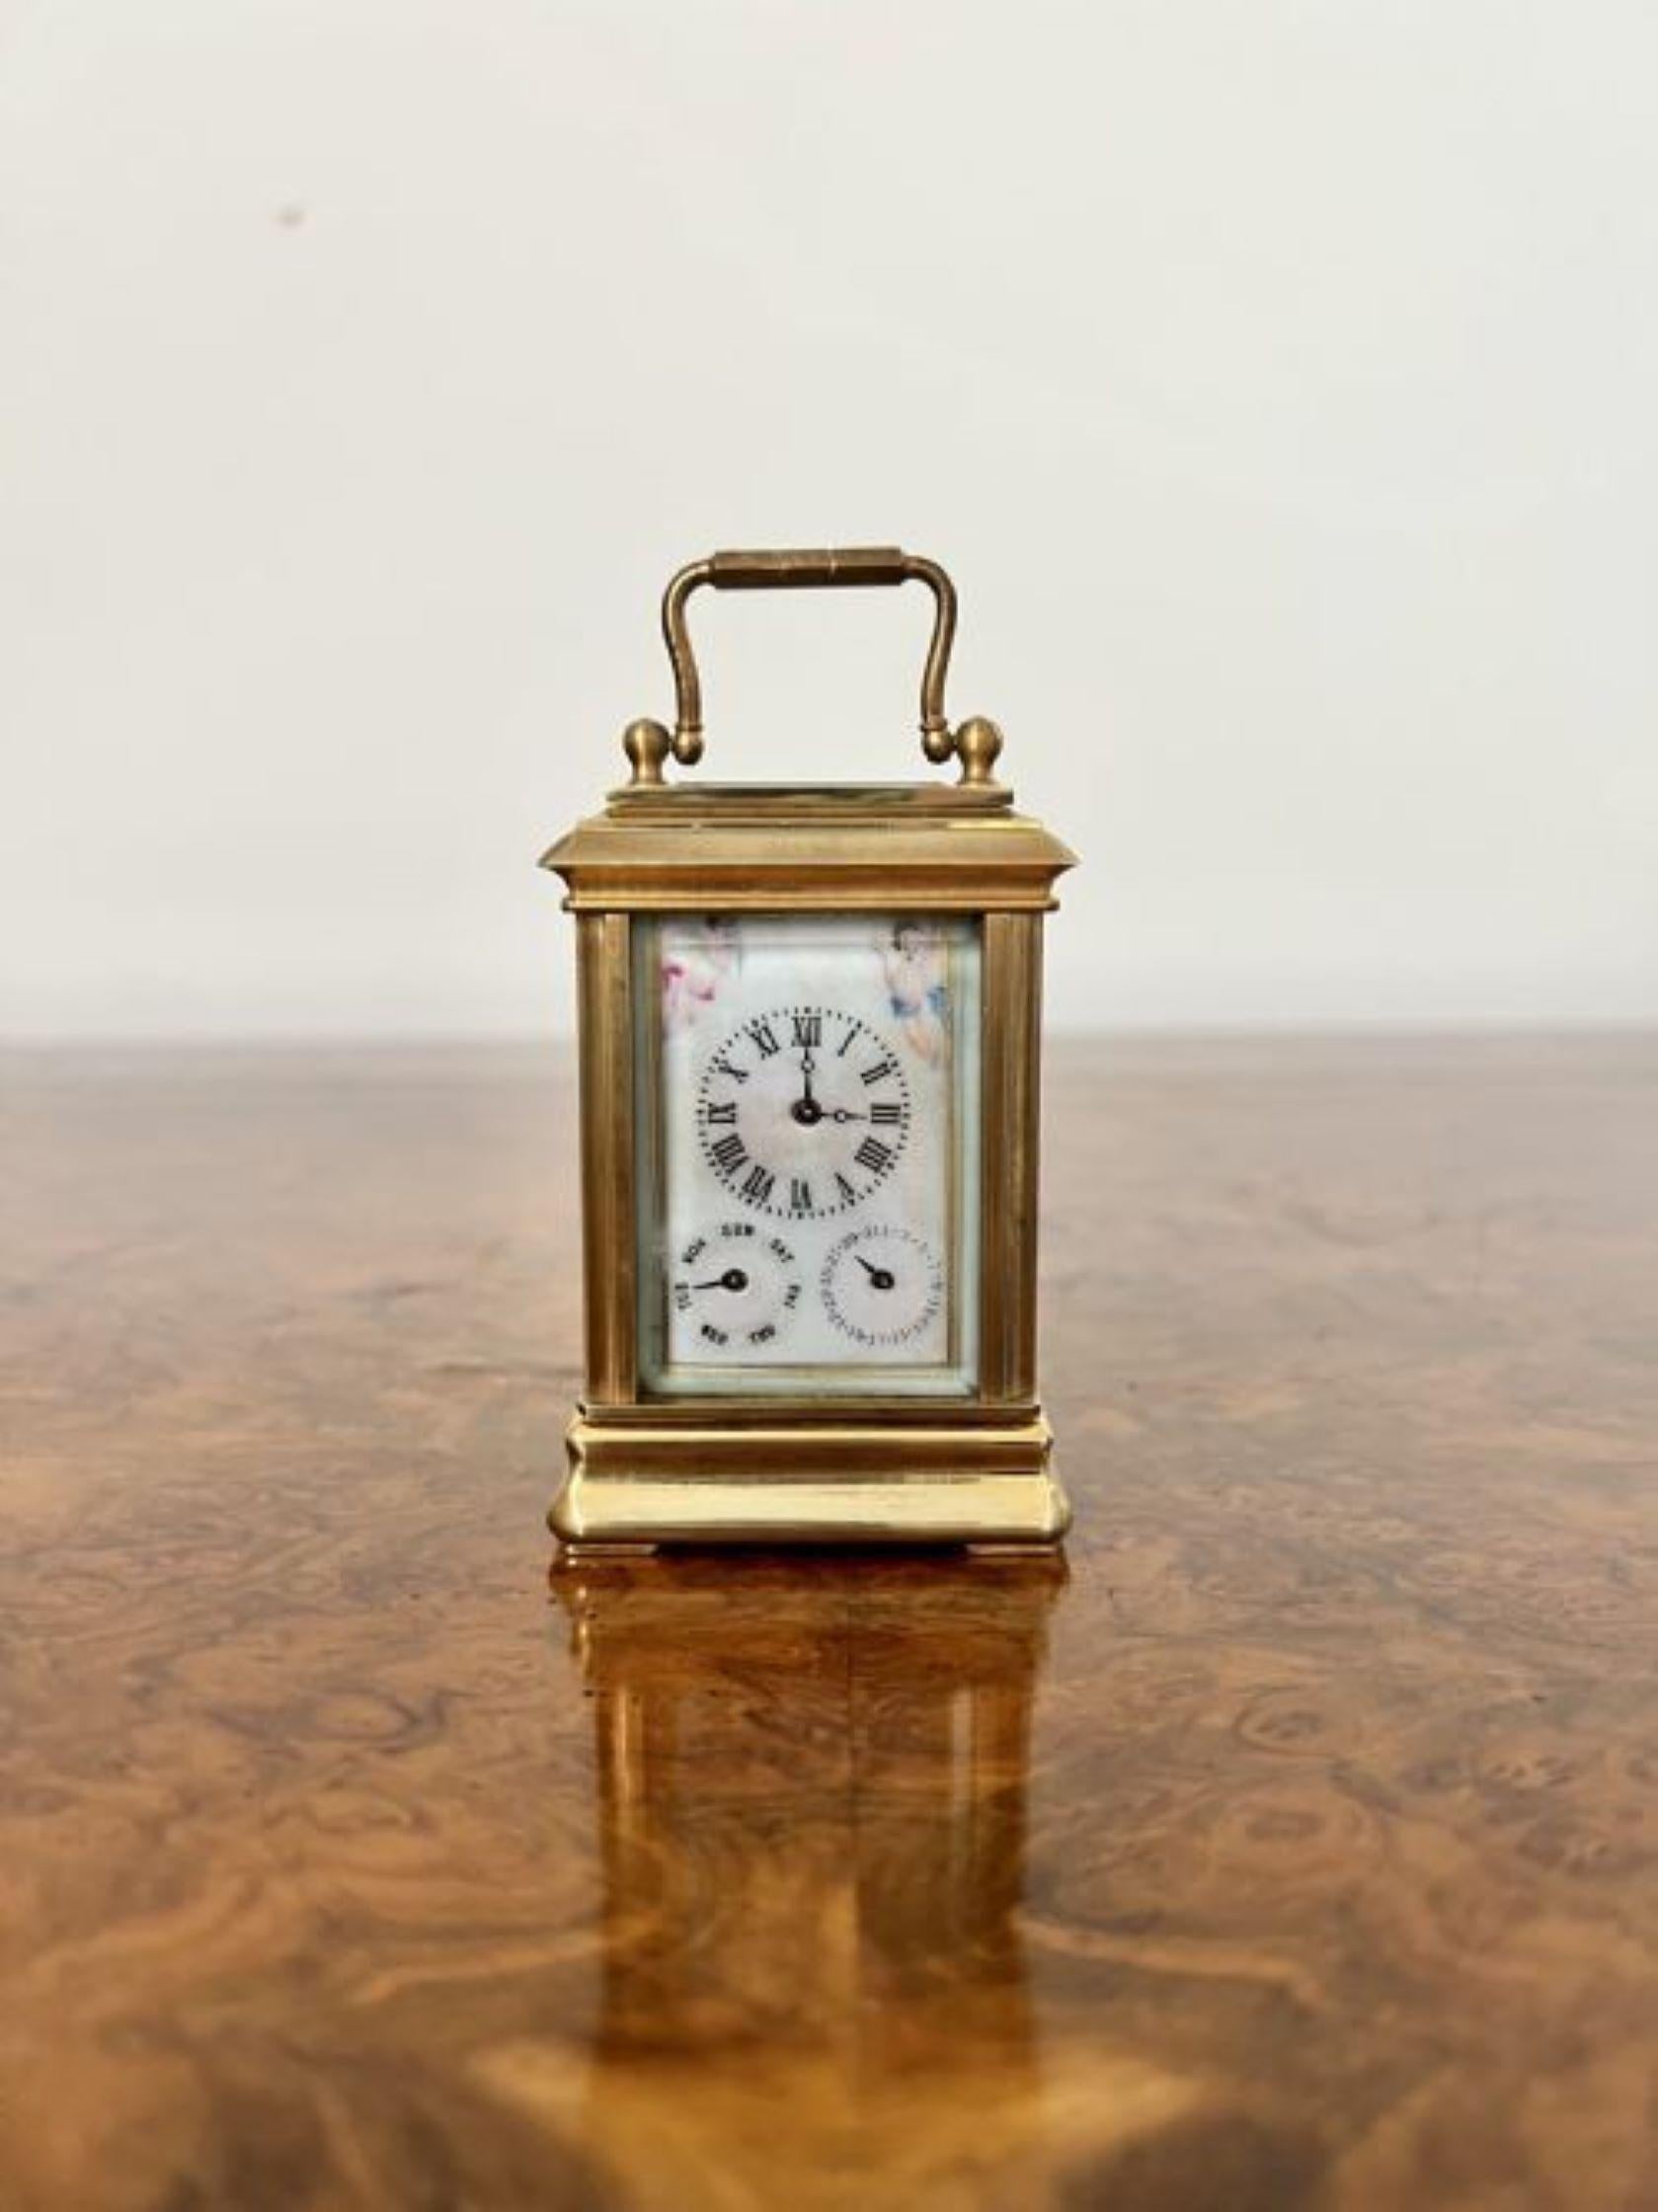 Stunning antique miniature quality brass carriage clock with hand painted porcelain panels having a day and date dial, wonderful hand painted porcelain panels decorated with cherubs in fantastic green, blue, red and white colours with gold gilded